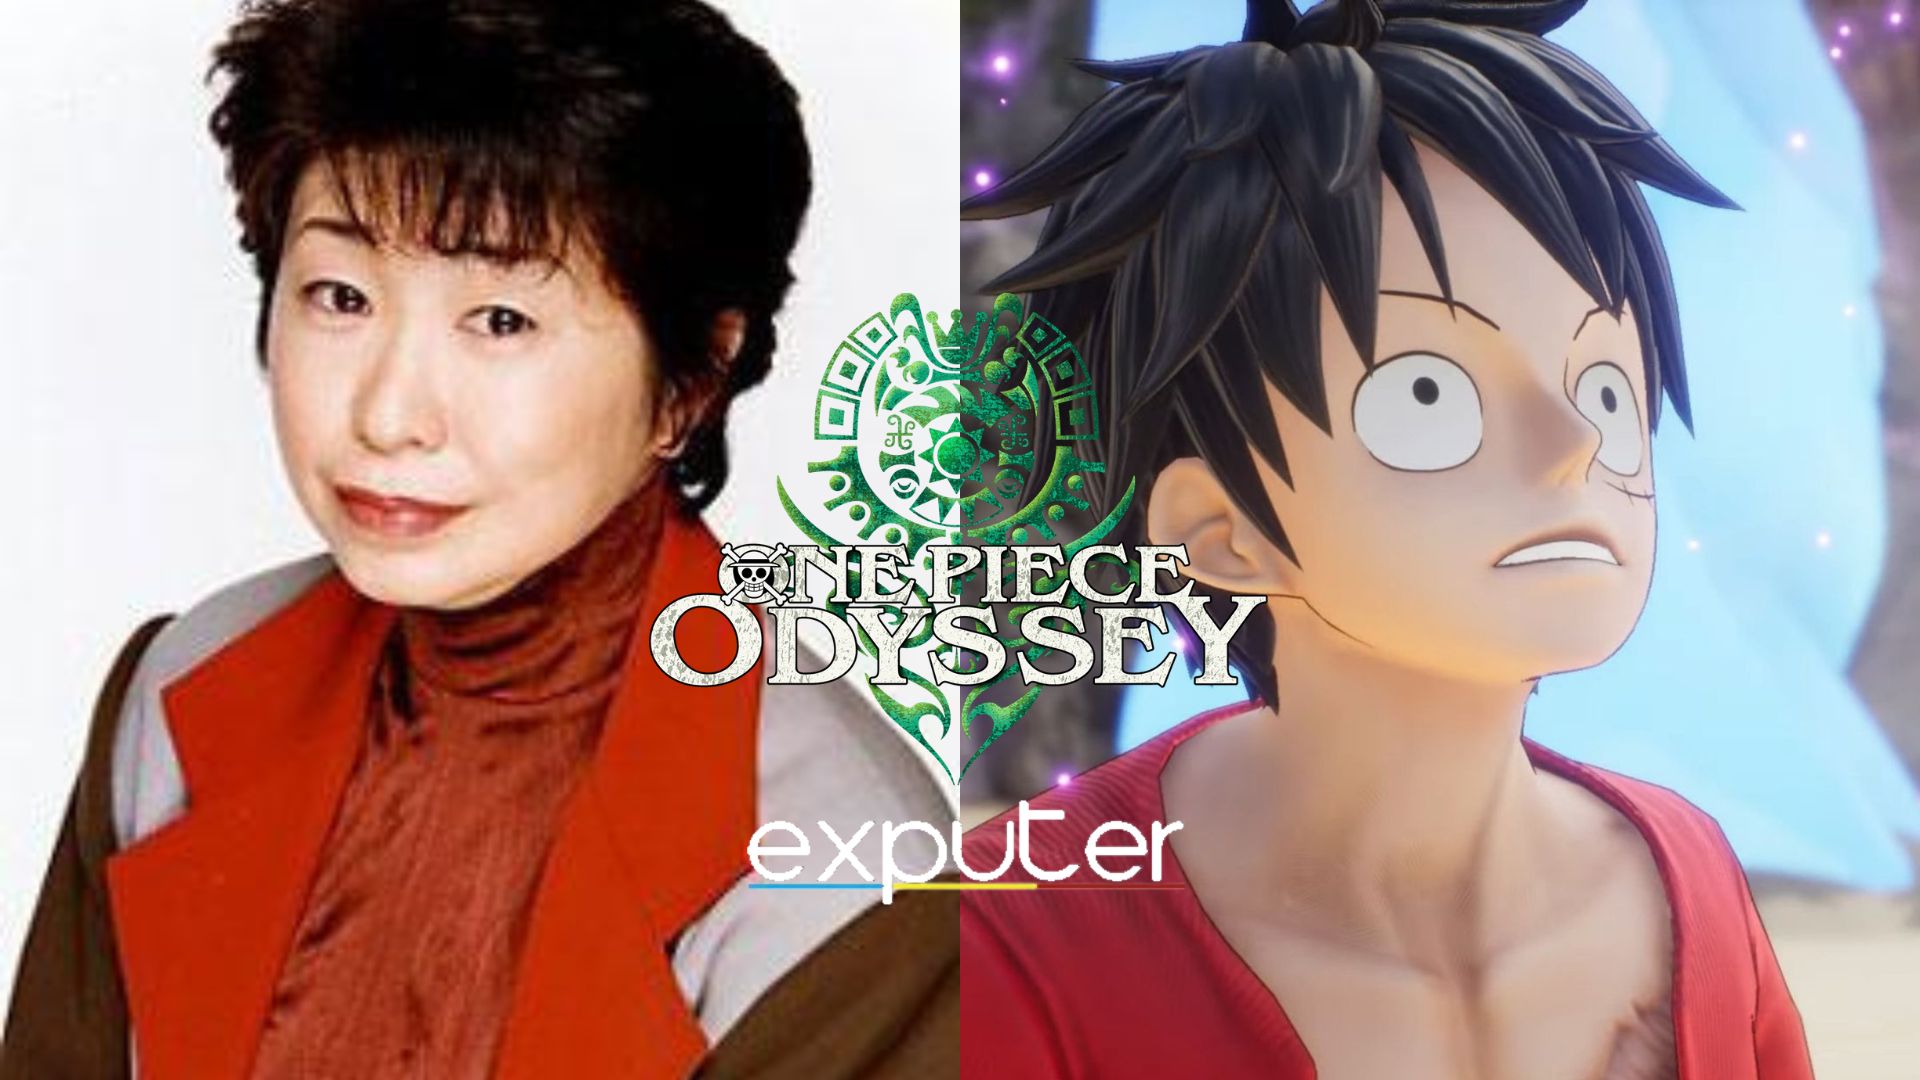 Luffy's voice actress